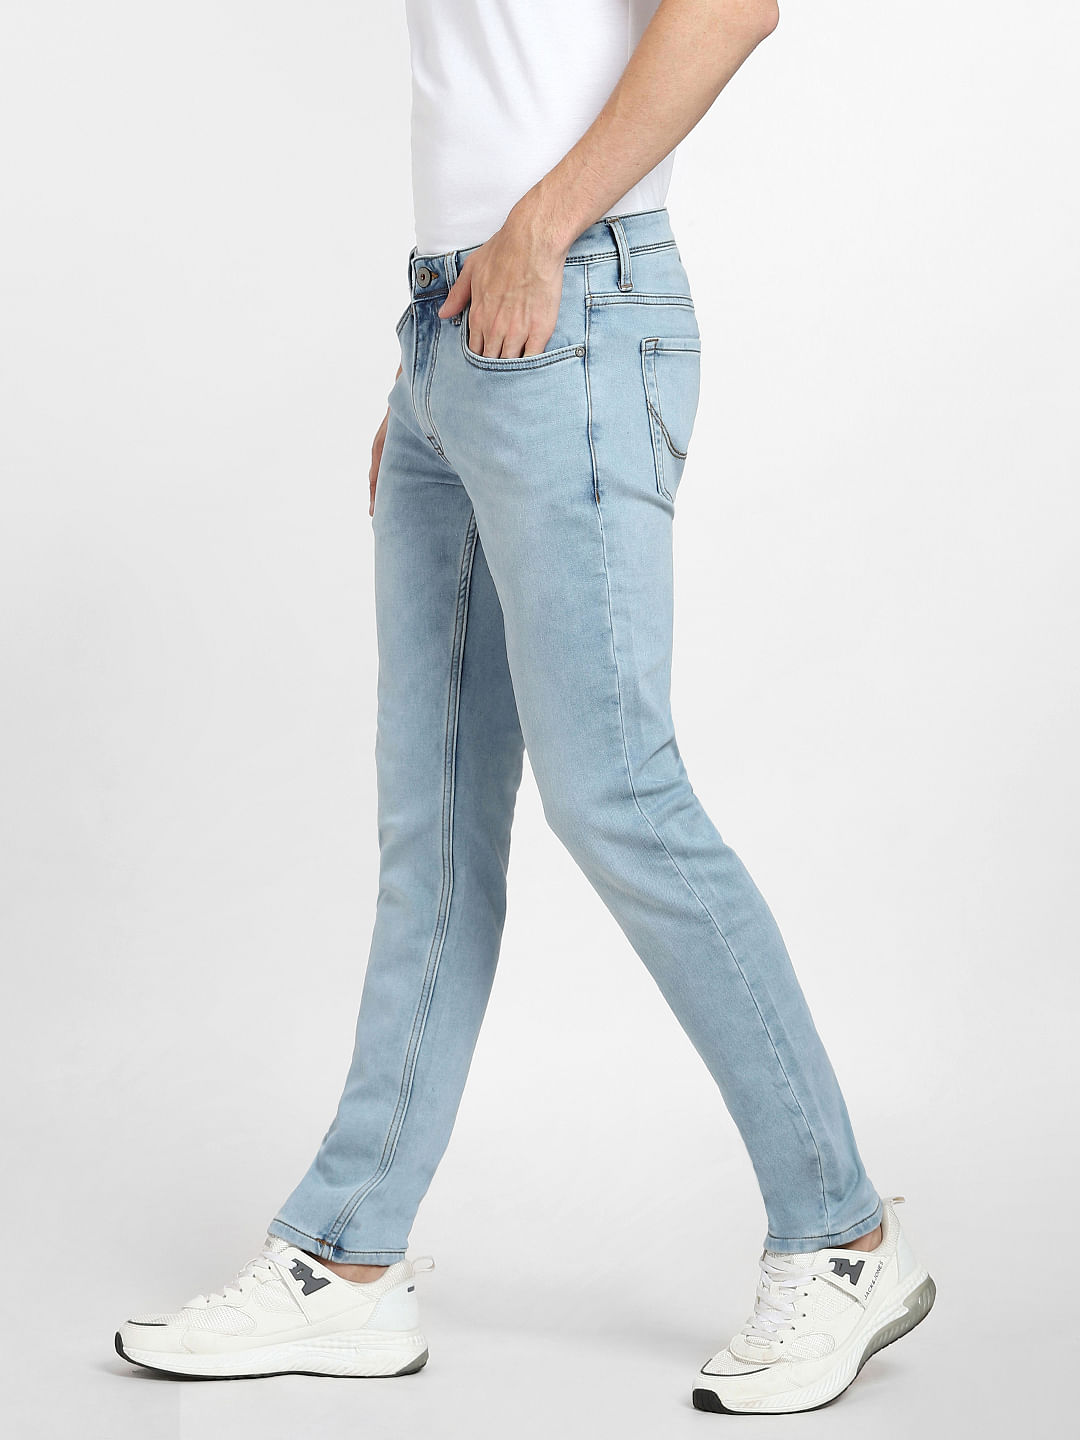 Premium Denim Jeans in Mid-Wash - Grace and Lace